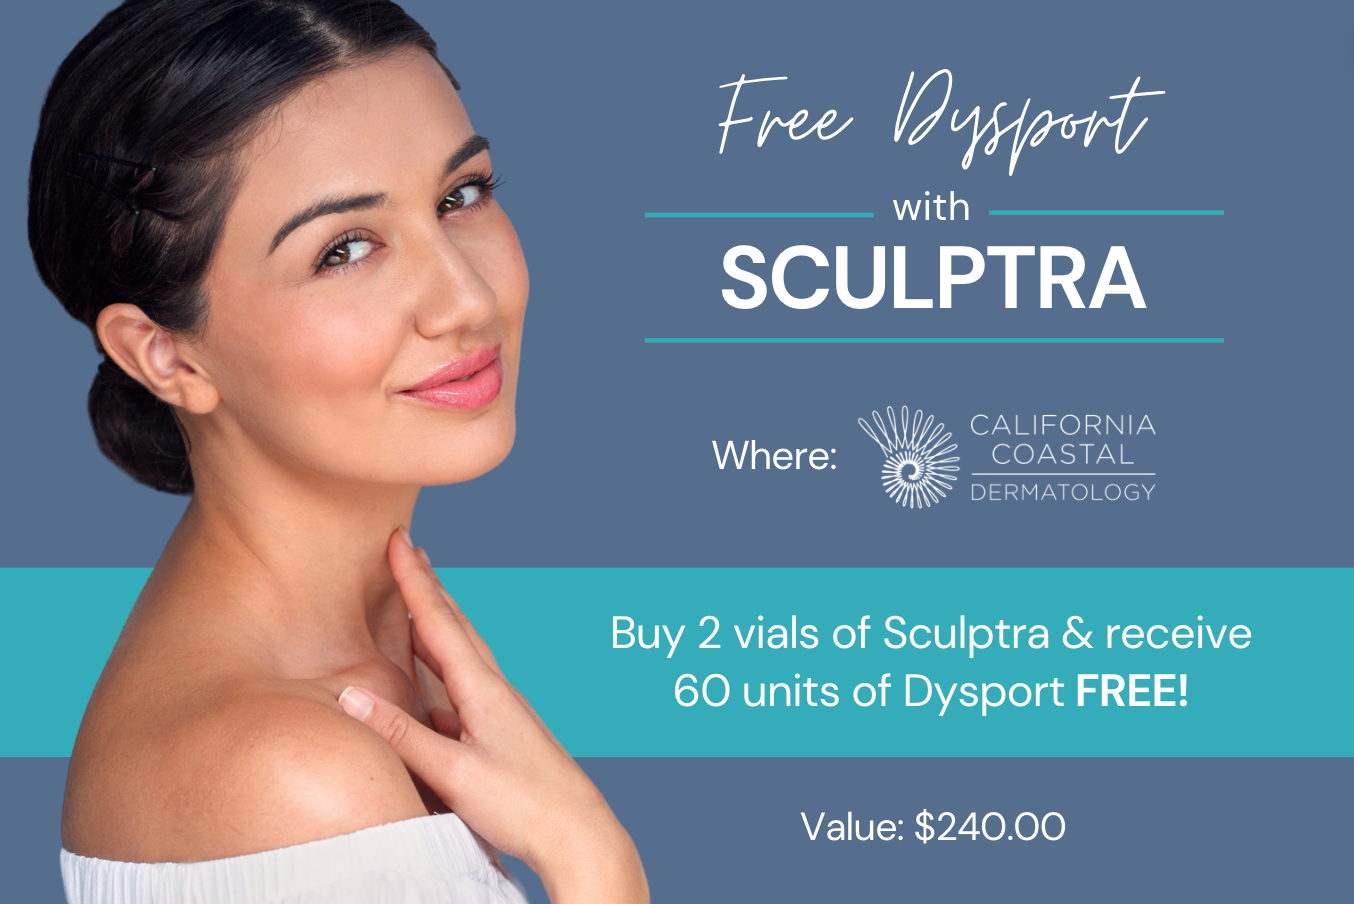 buy 2 vials of Sculptra and receive 60 units of Dysport FREE